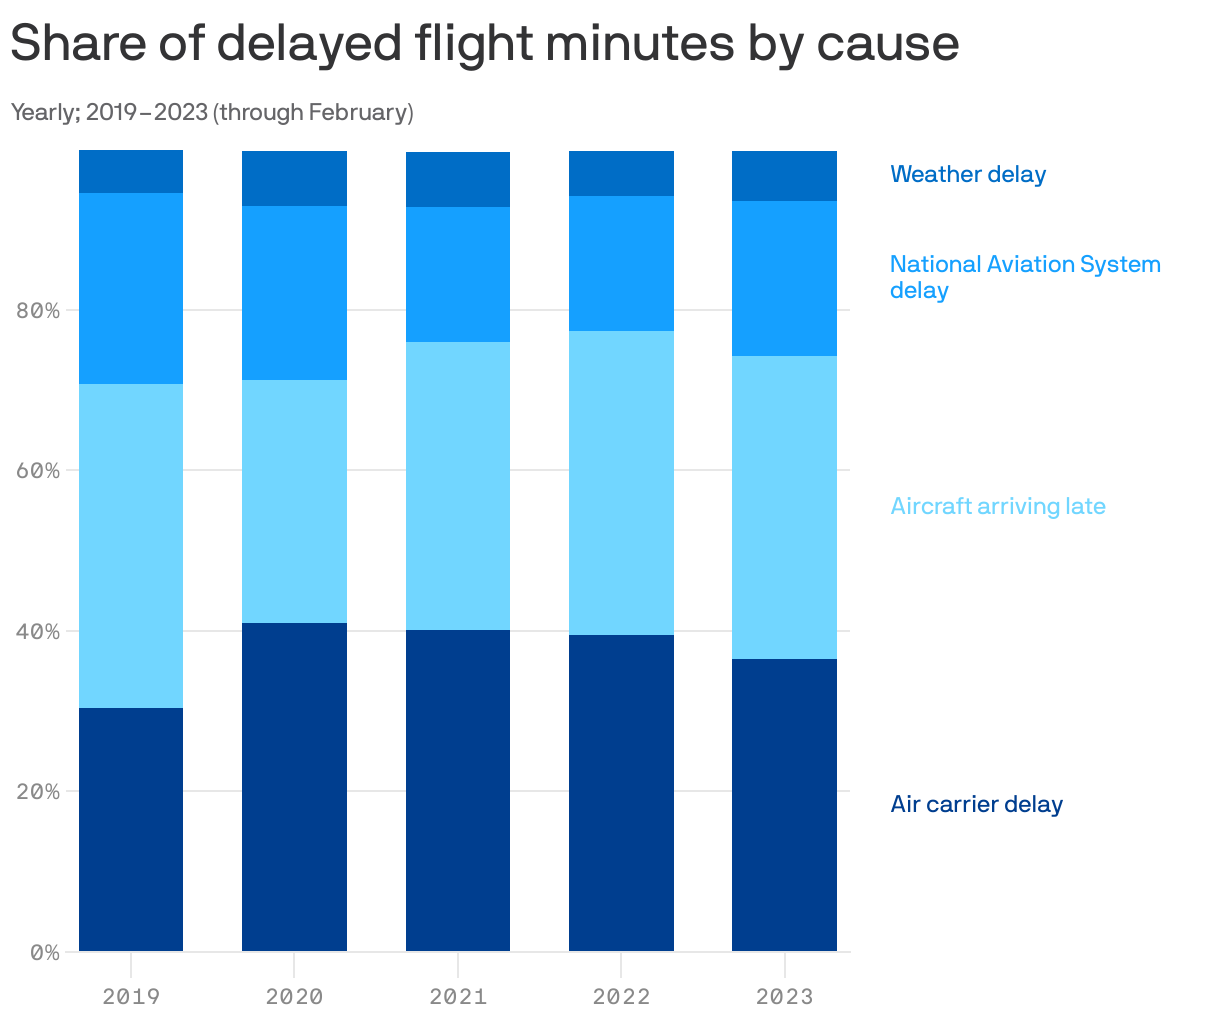 Share of delayed flight minutes by cause